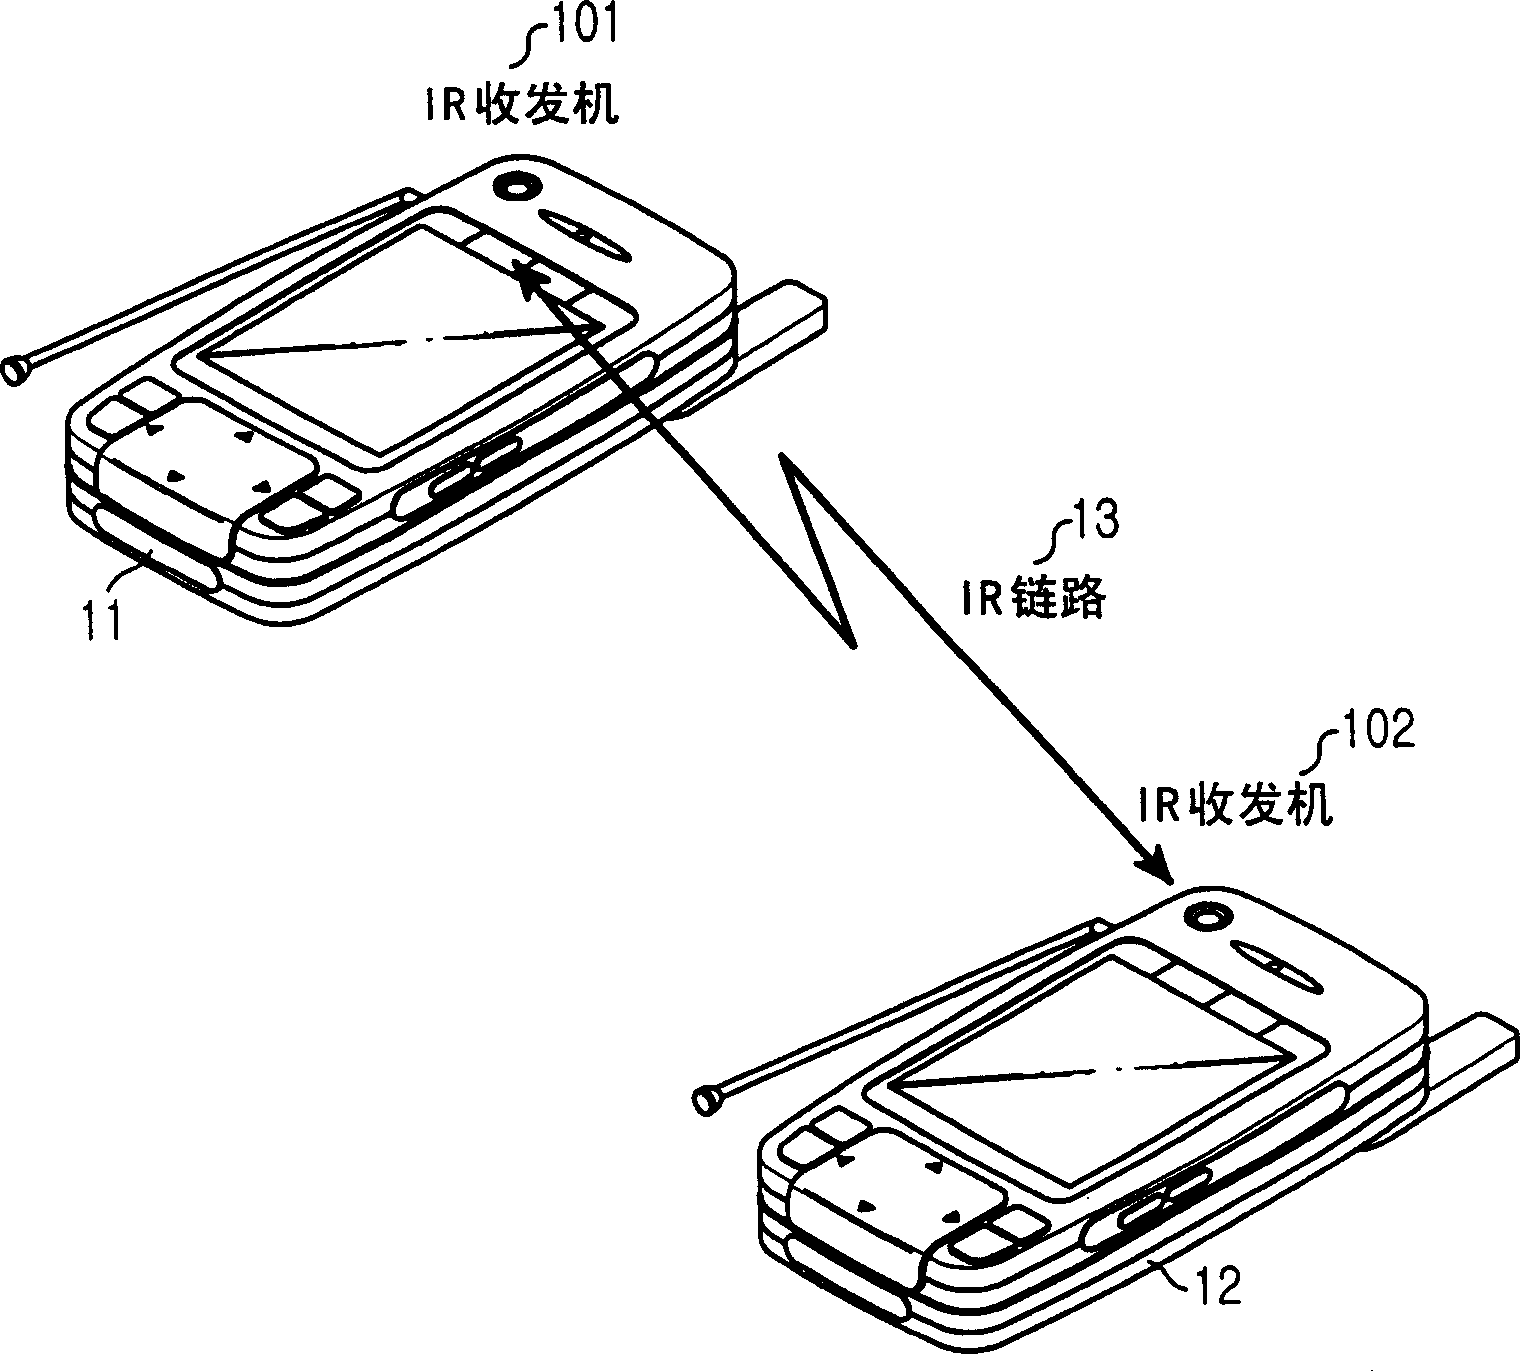 Wireless terminal for carrying out visible light short-range communication using camera device